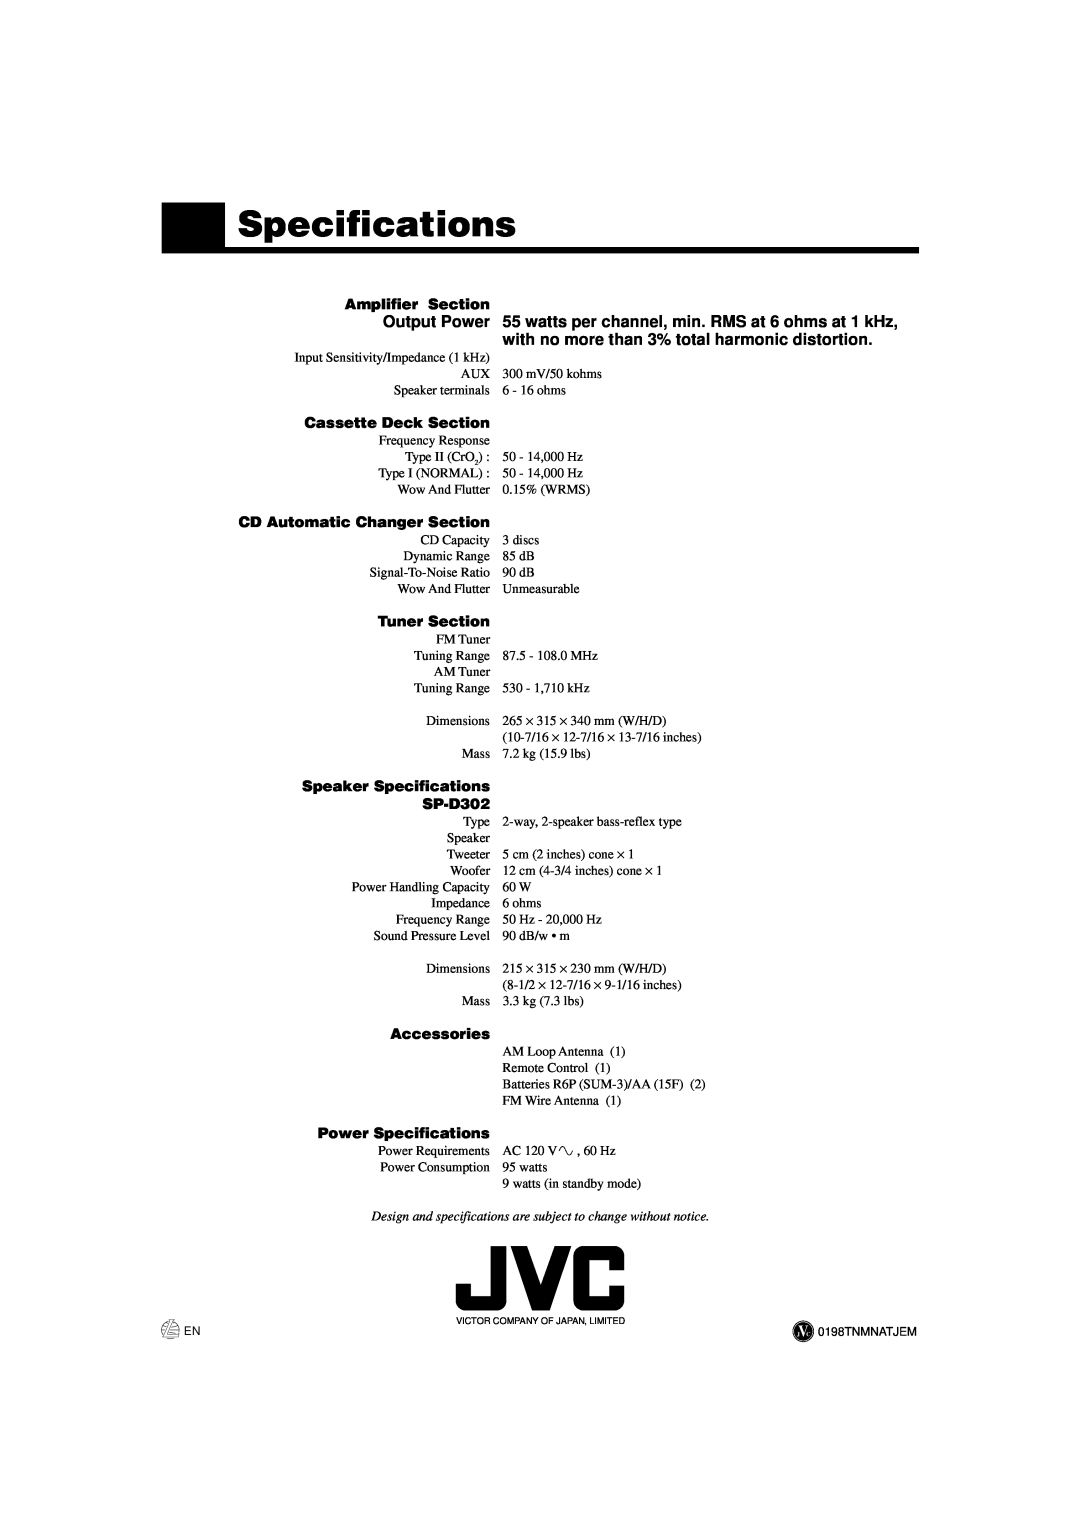 JVC SP-D302 Specifications, Output Power, watts per channel, min. RMS at 6 ohms at 1 kHz, Amplifier Section, Tuner Section 